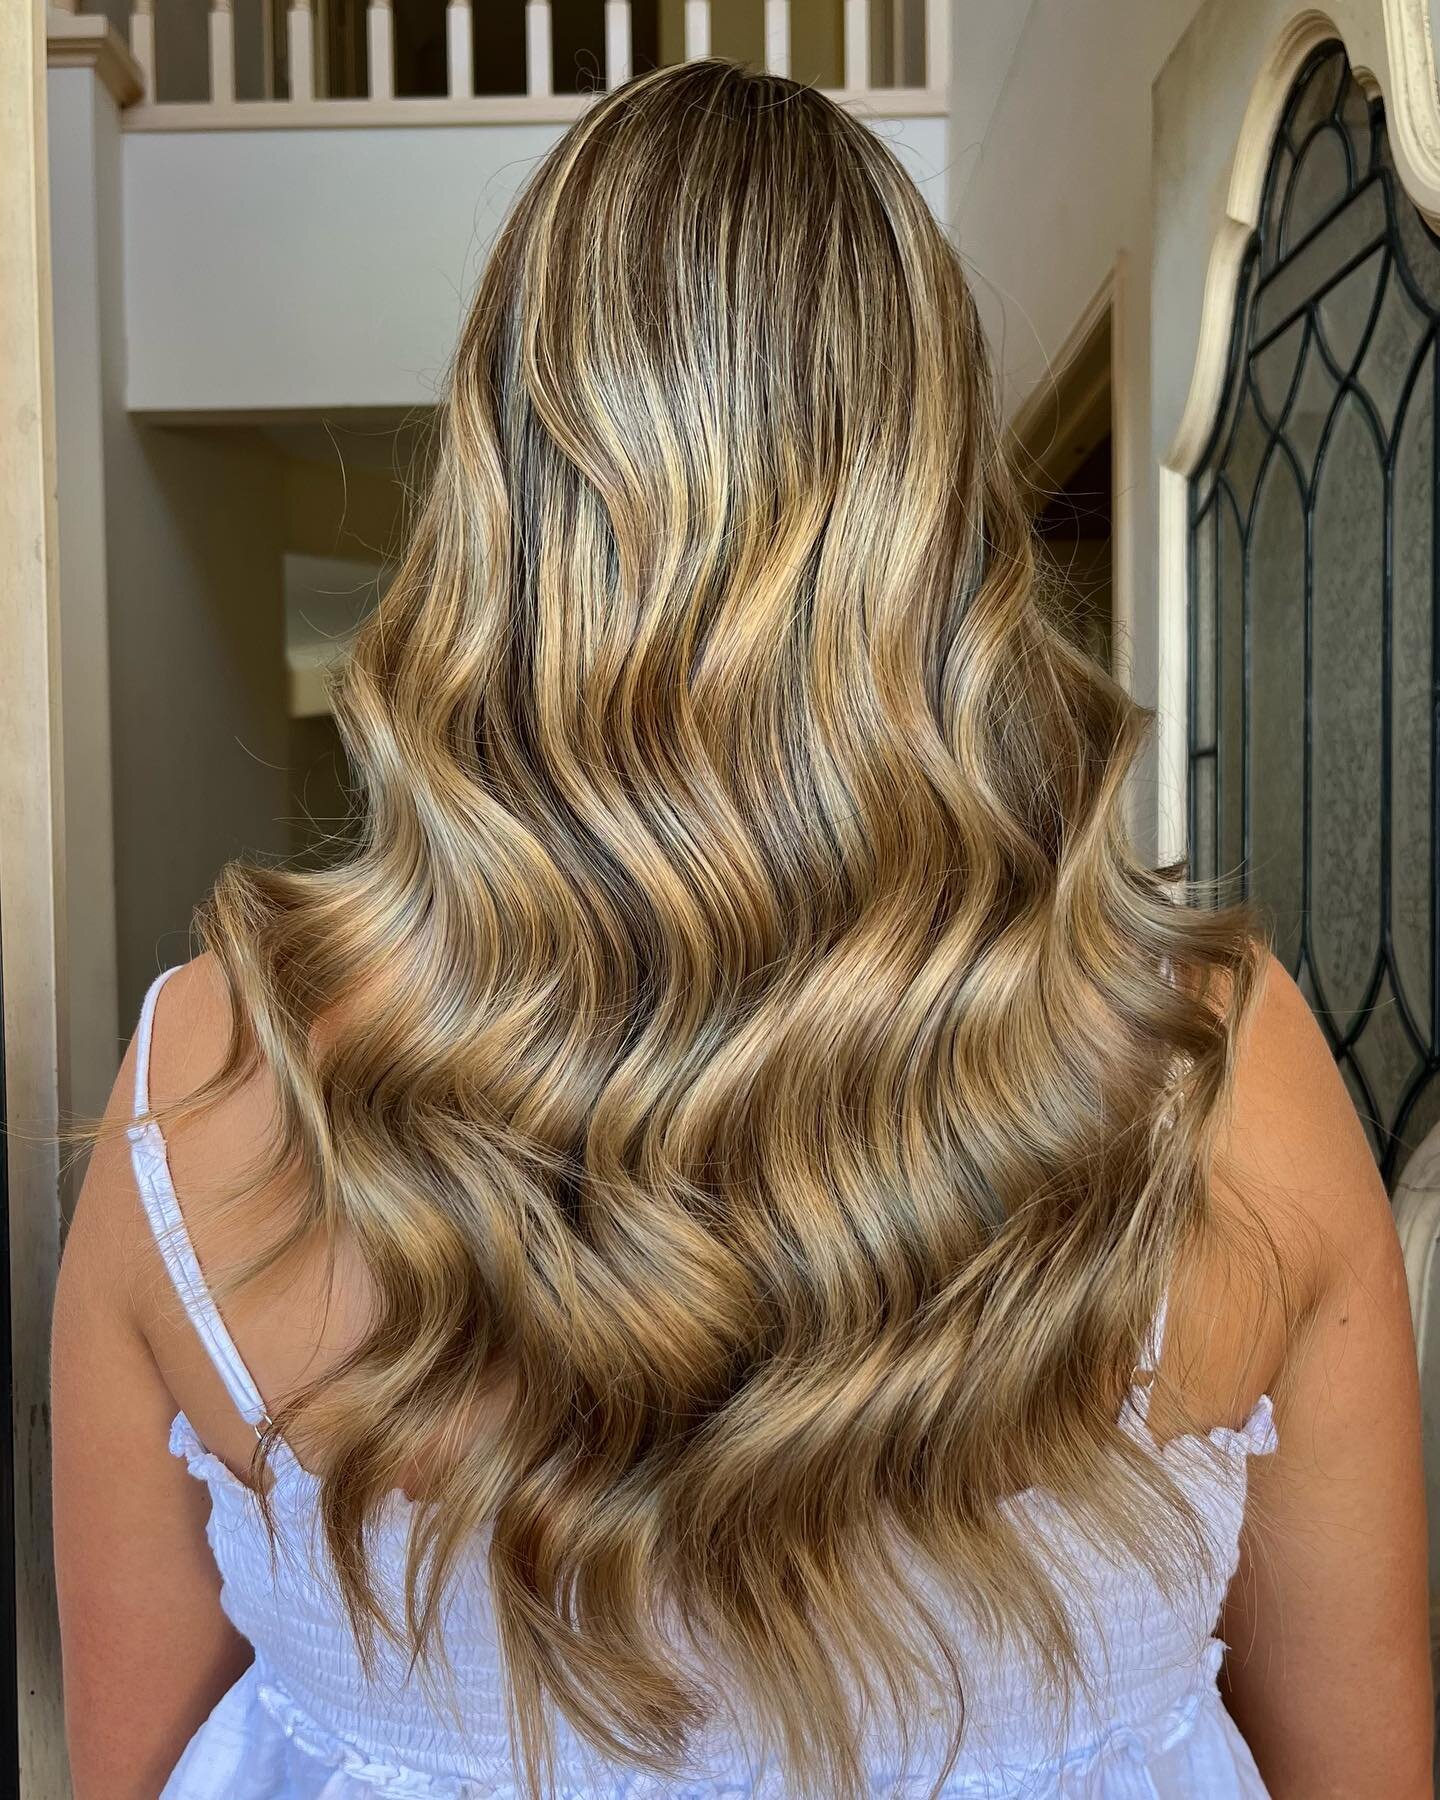 Delicious golden waves ❤️&zwj;🔥

Using my fave @kykhair mist-ique hair oil for that shine ✨ 

I&rsquo;m sooo slack with taking hair pikkies, posting this to hold myself accountable 🫡